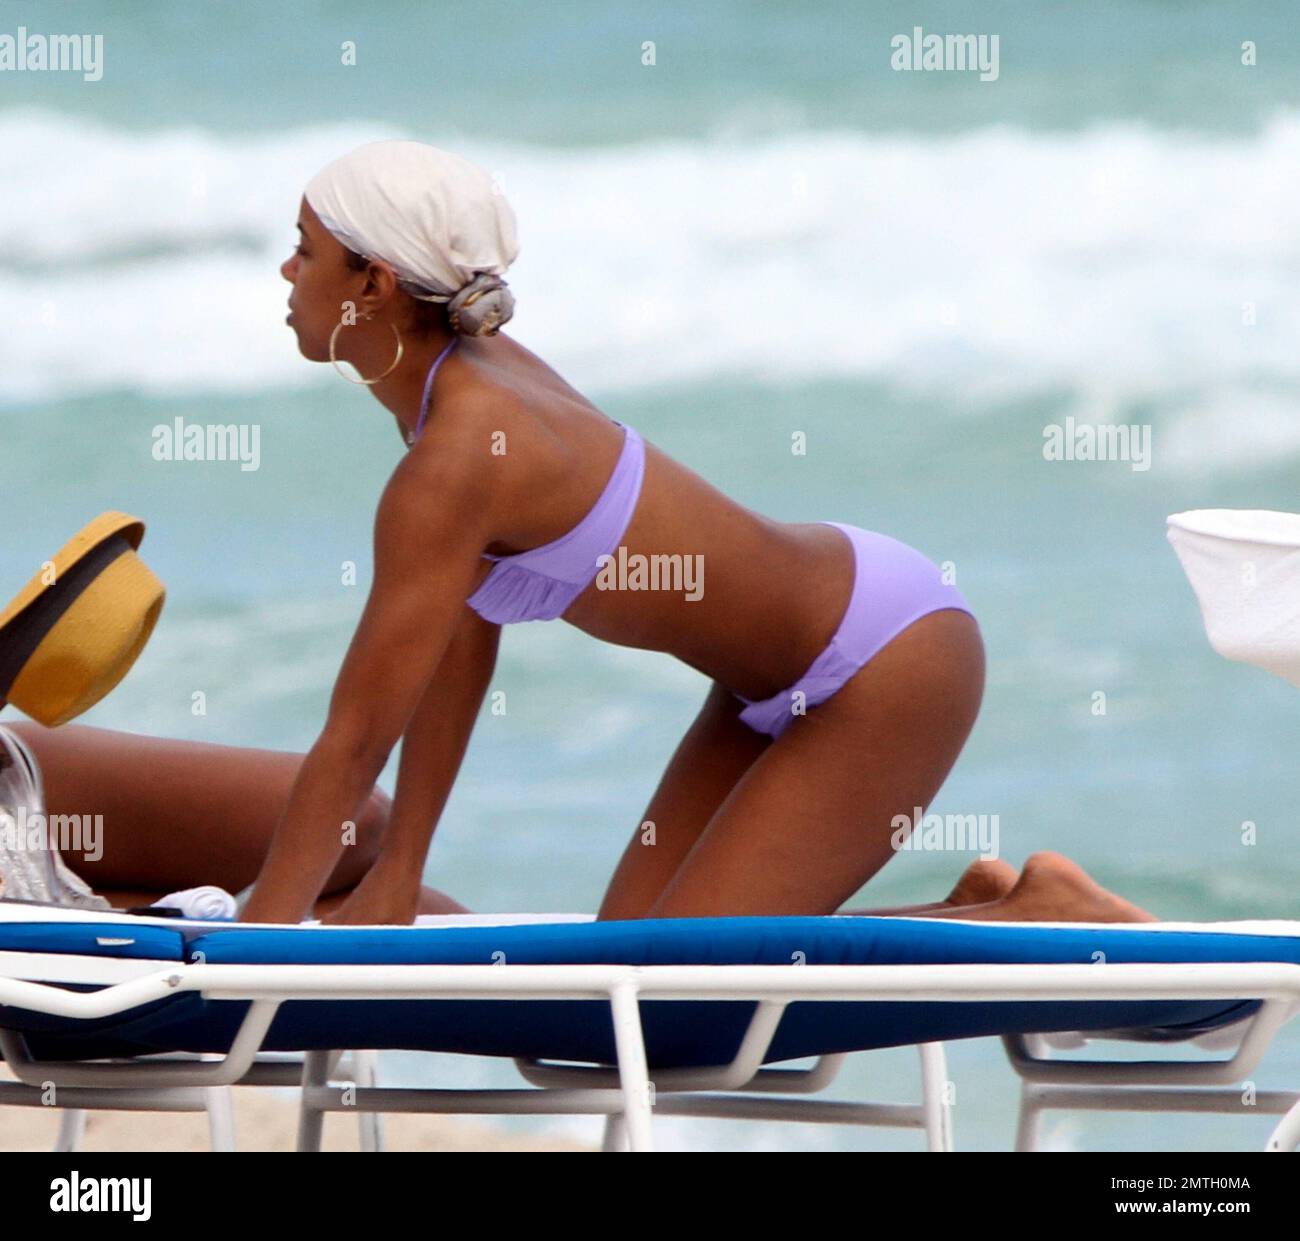 X Factor judge, Kelly Rowland, shows off her enviable figure in a purple  bikini during a relaxing afternoon on the beach before her show tonight at  the American Airlines Arena. Rowland earlier